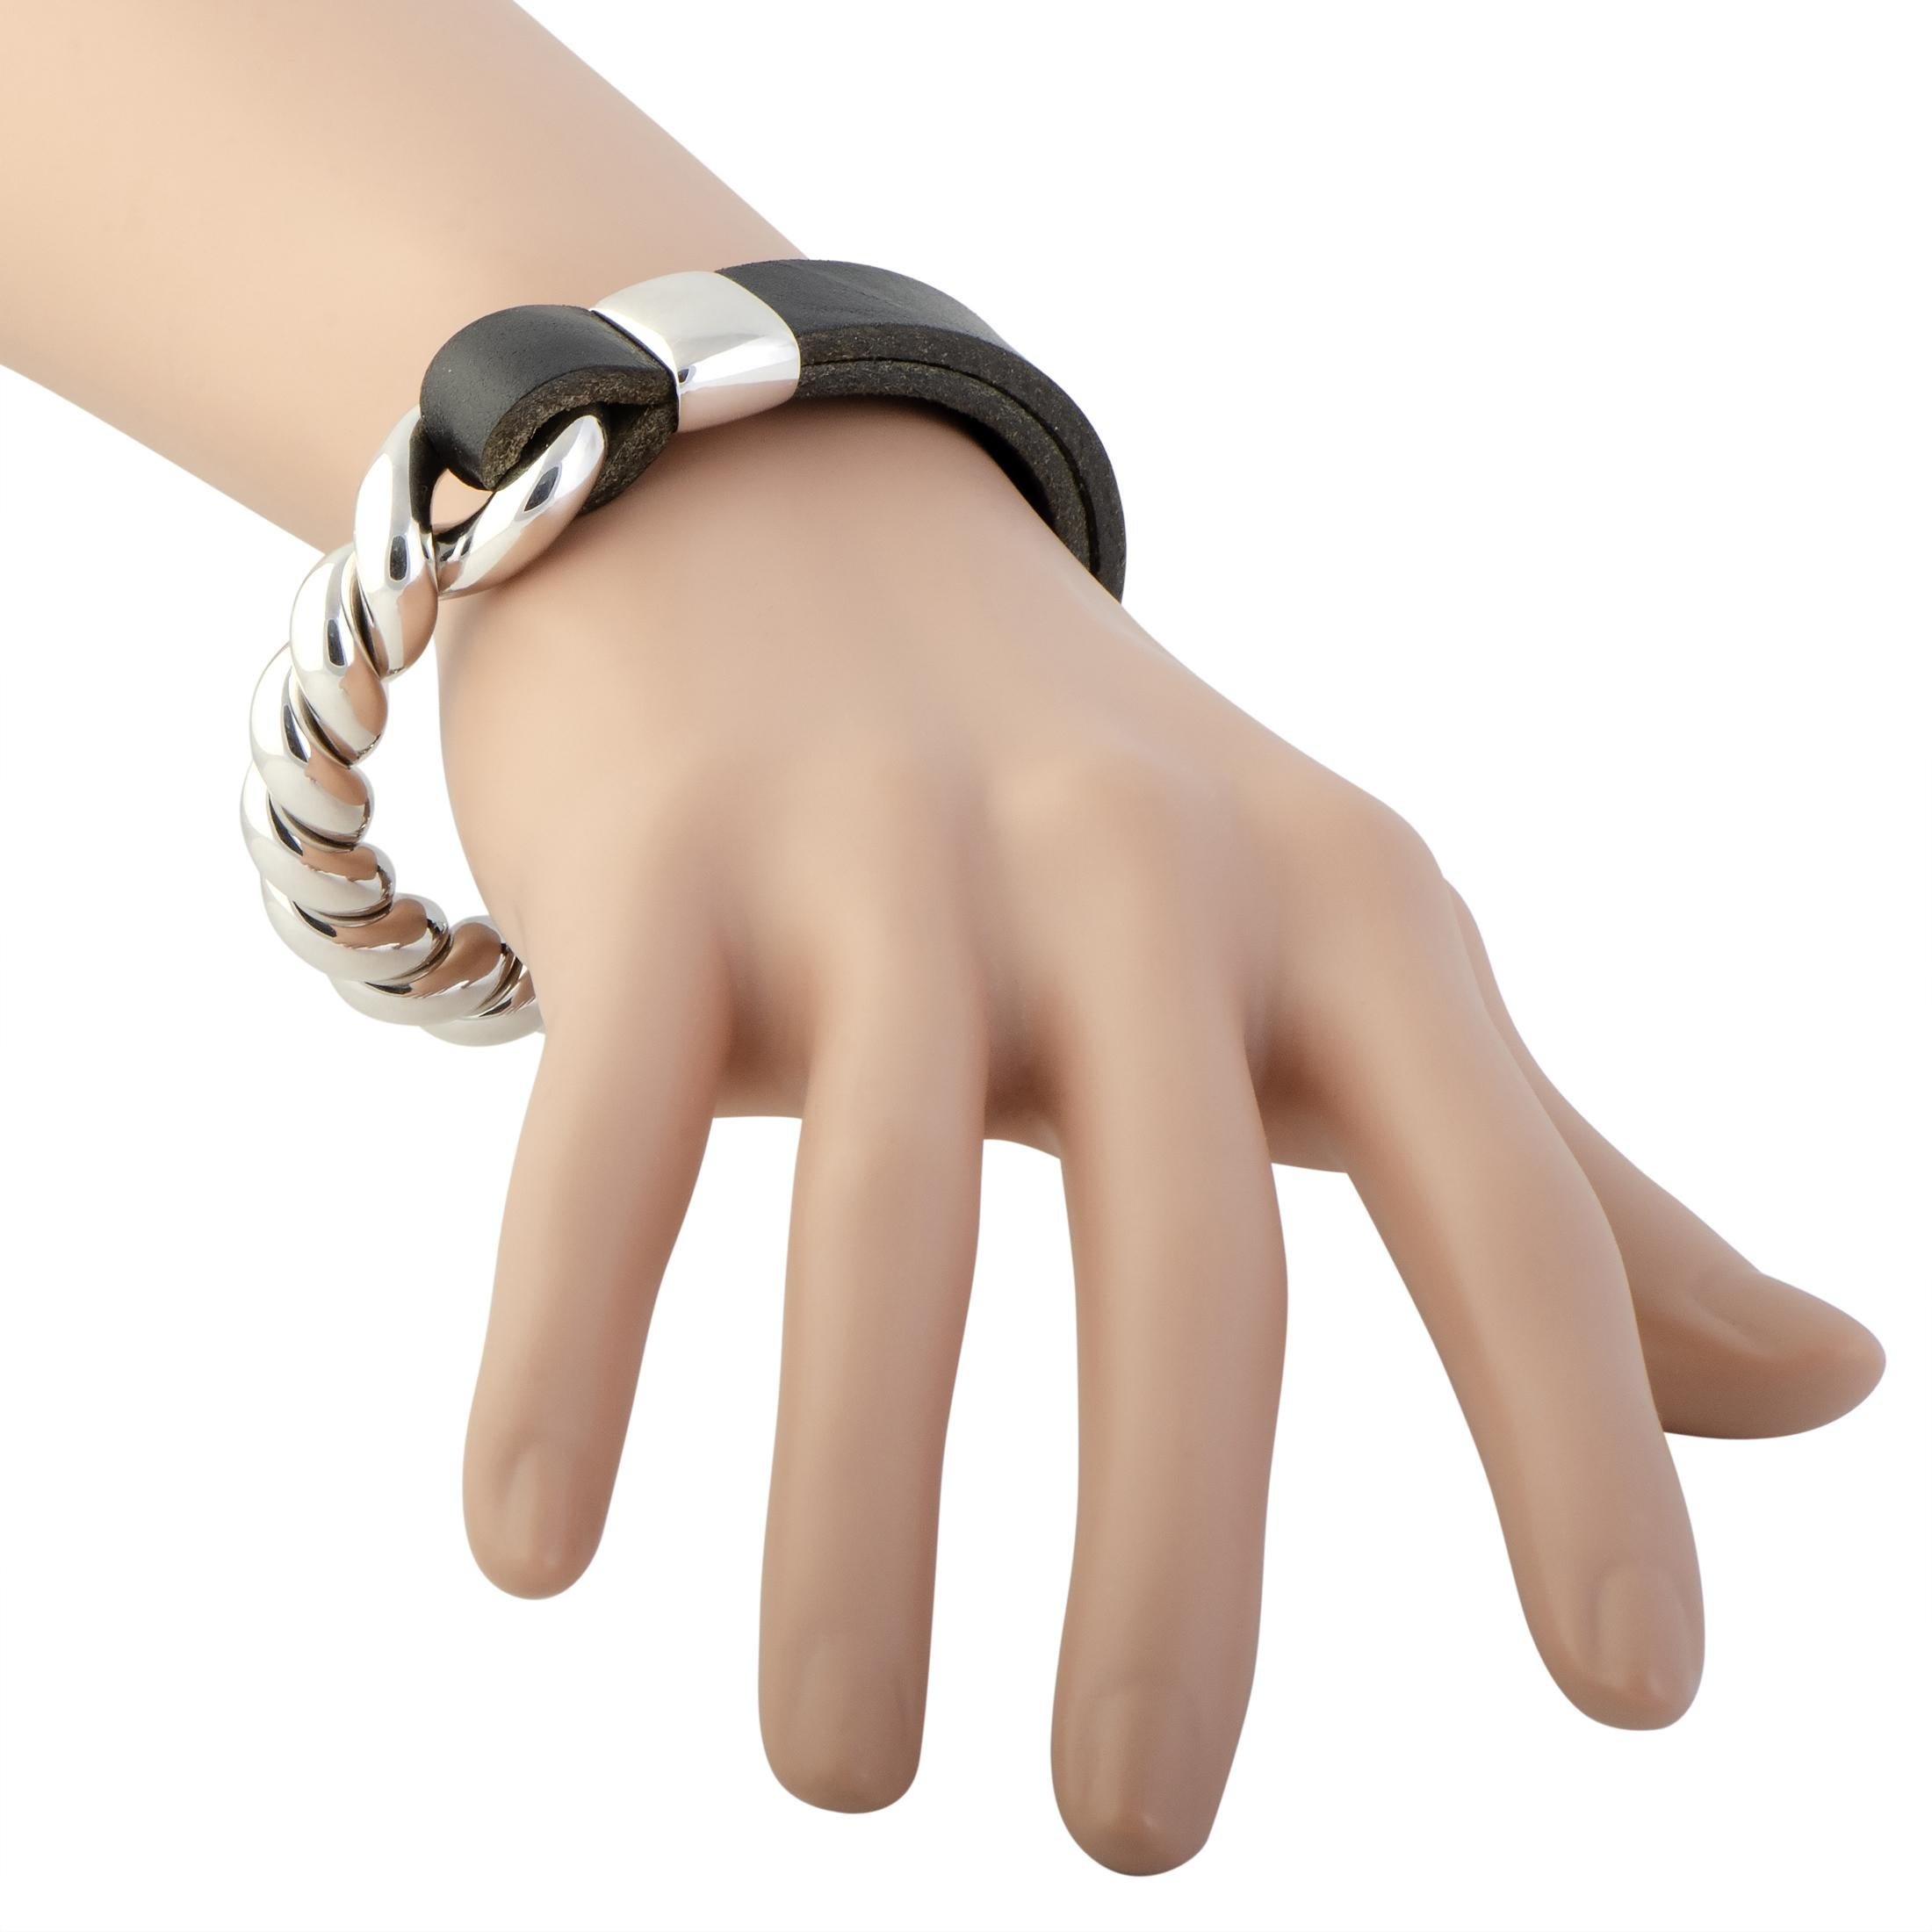 Boasting a stunningly fashionable appeal thanks to the incredibly offbeat design and the extraordinary combination of metal and leather, this fabulous jewelry piece will most certainly add an attractive twist to any ensemble of yours. The bracelet